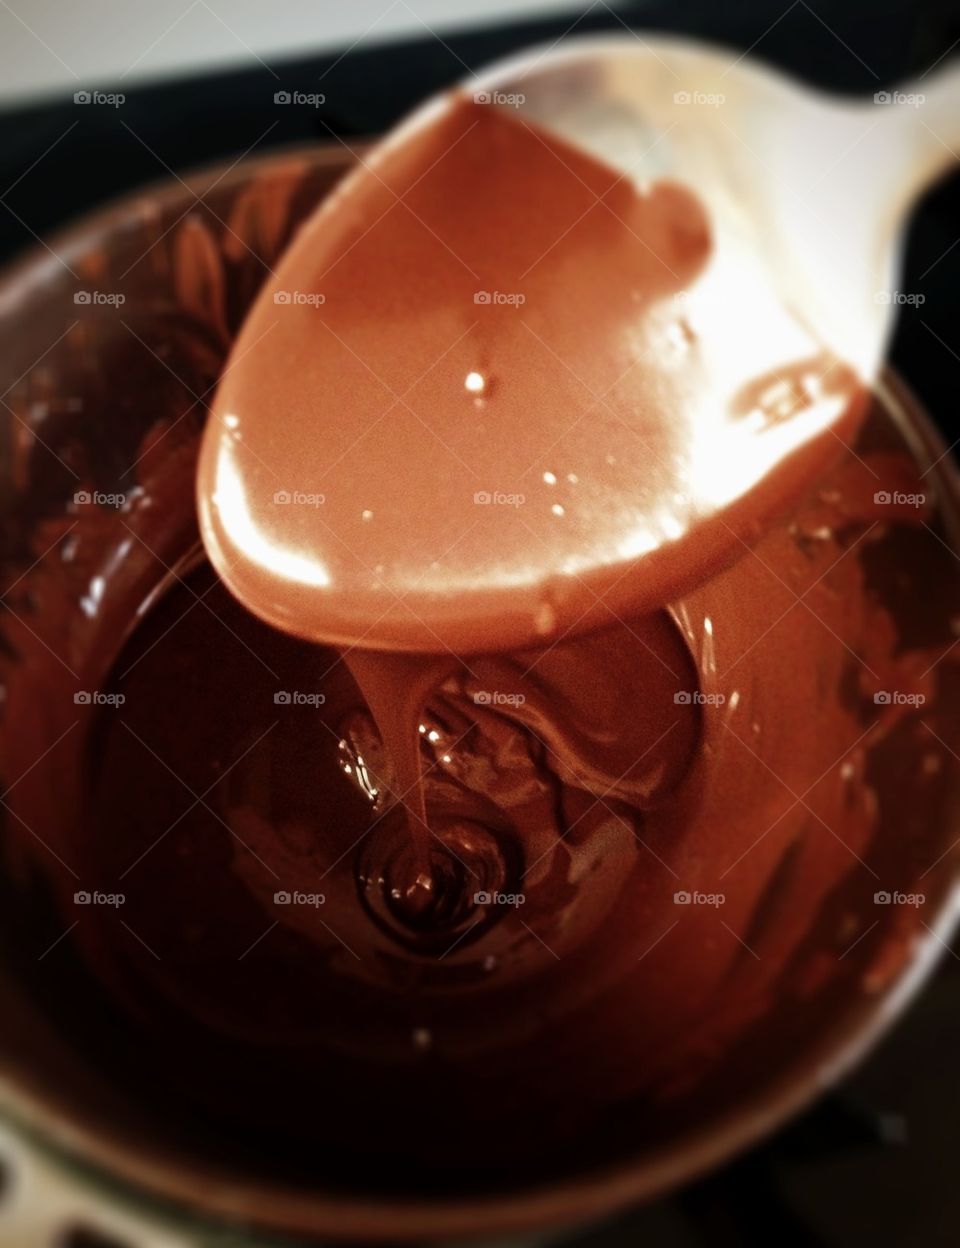 Melted chocolate